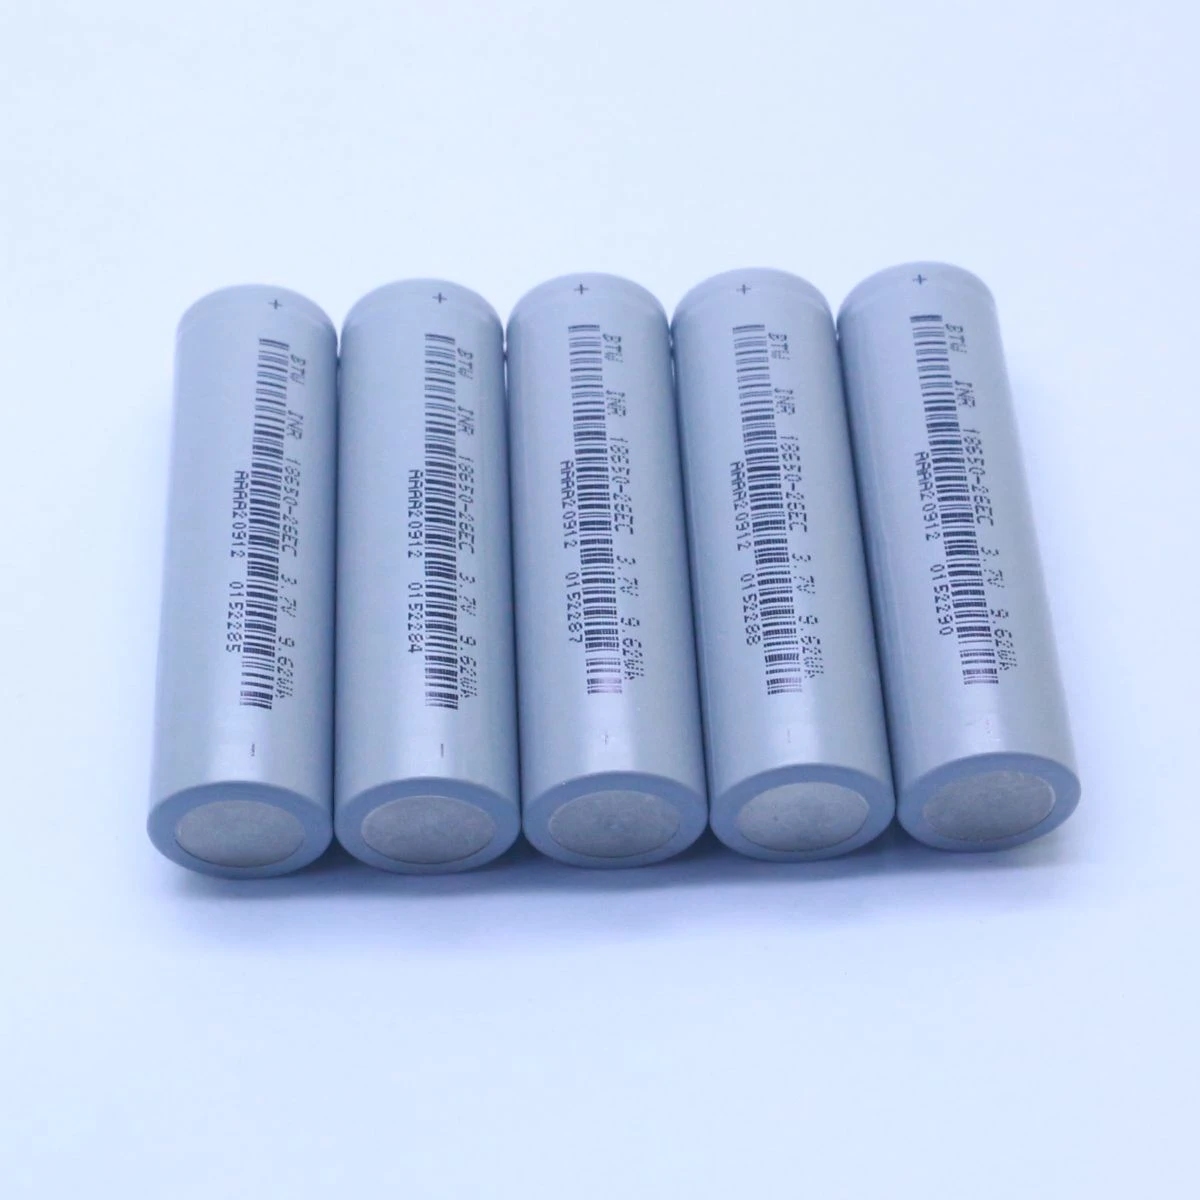 Rechargeable 18650 3.7V Li-Ion Battery 18650 3.7V Rechargeable Li-Ion Battery High Capacity 18650 Battery 18650